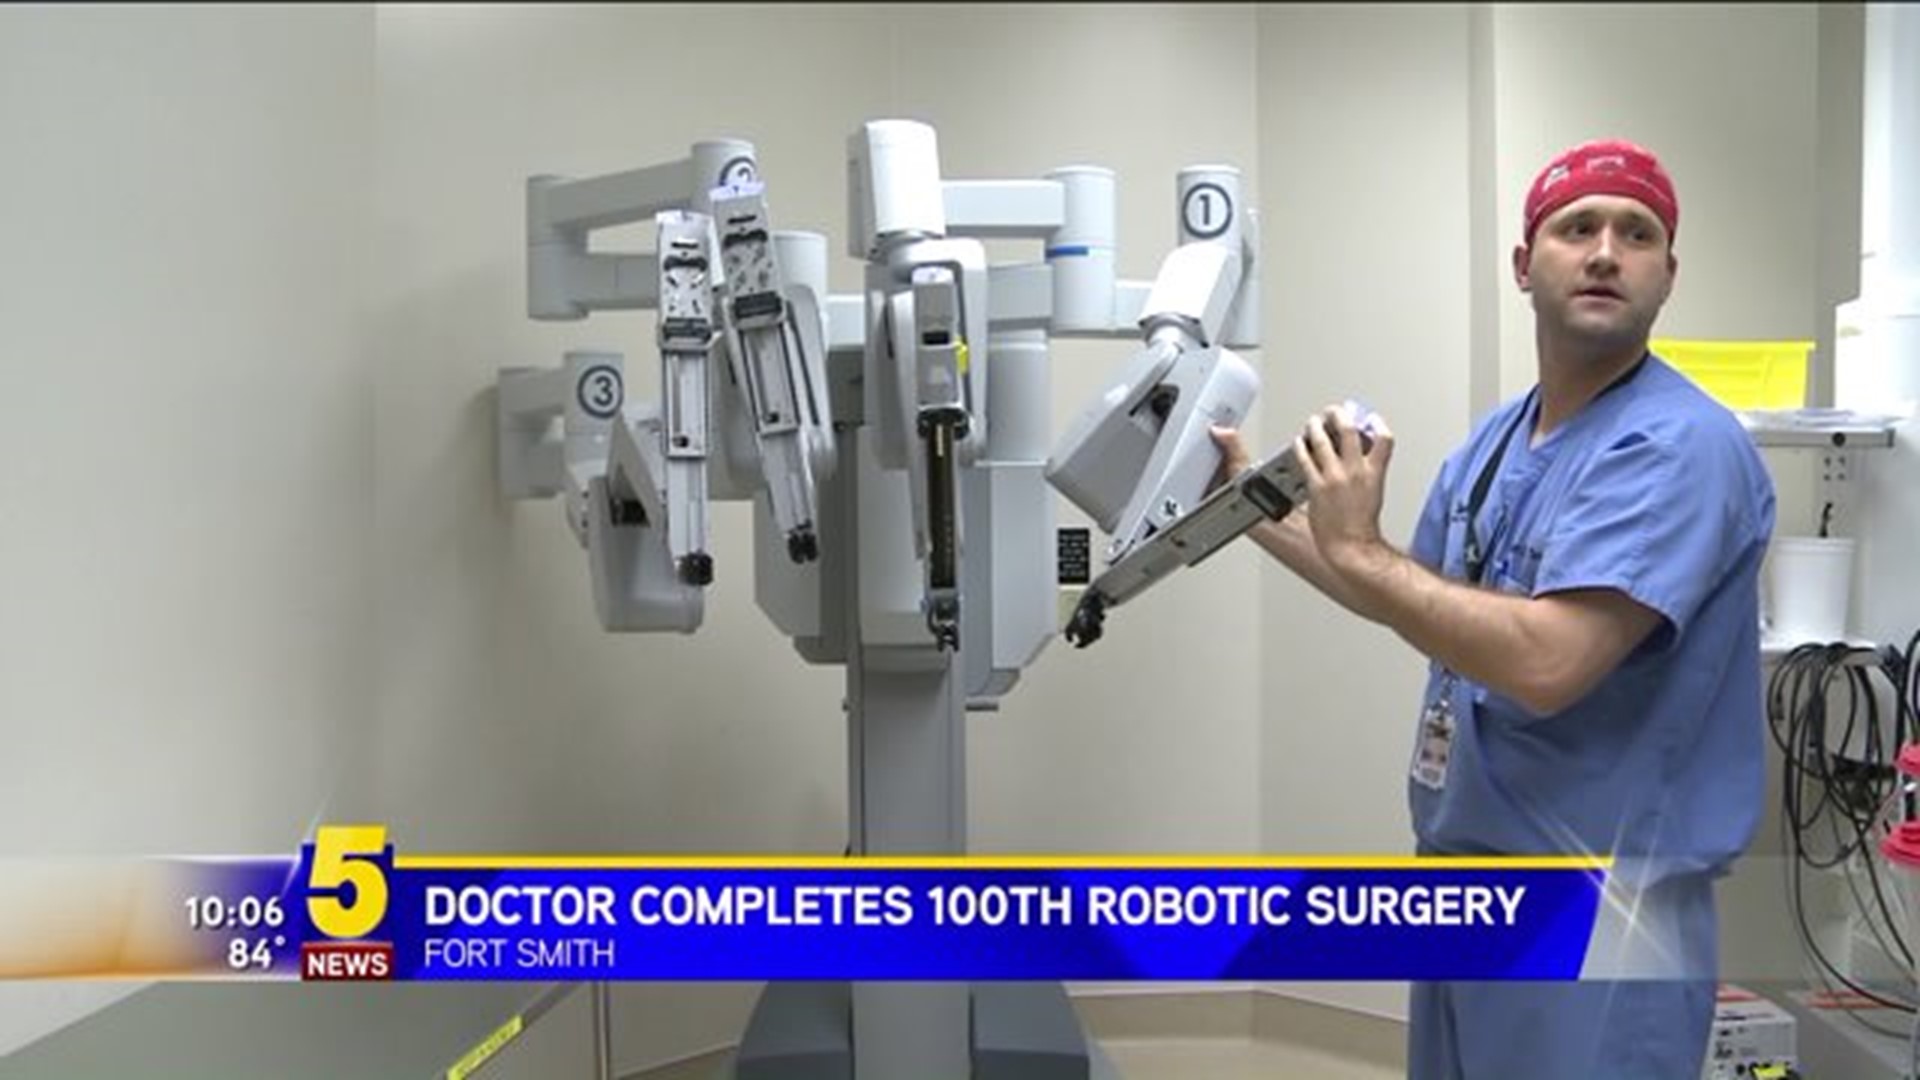 Doctor Completes 100th Robotic Surgery